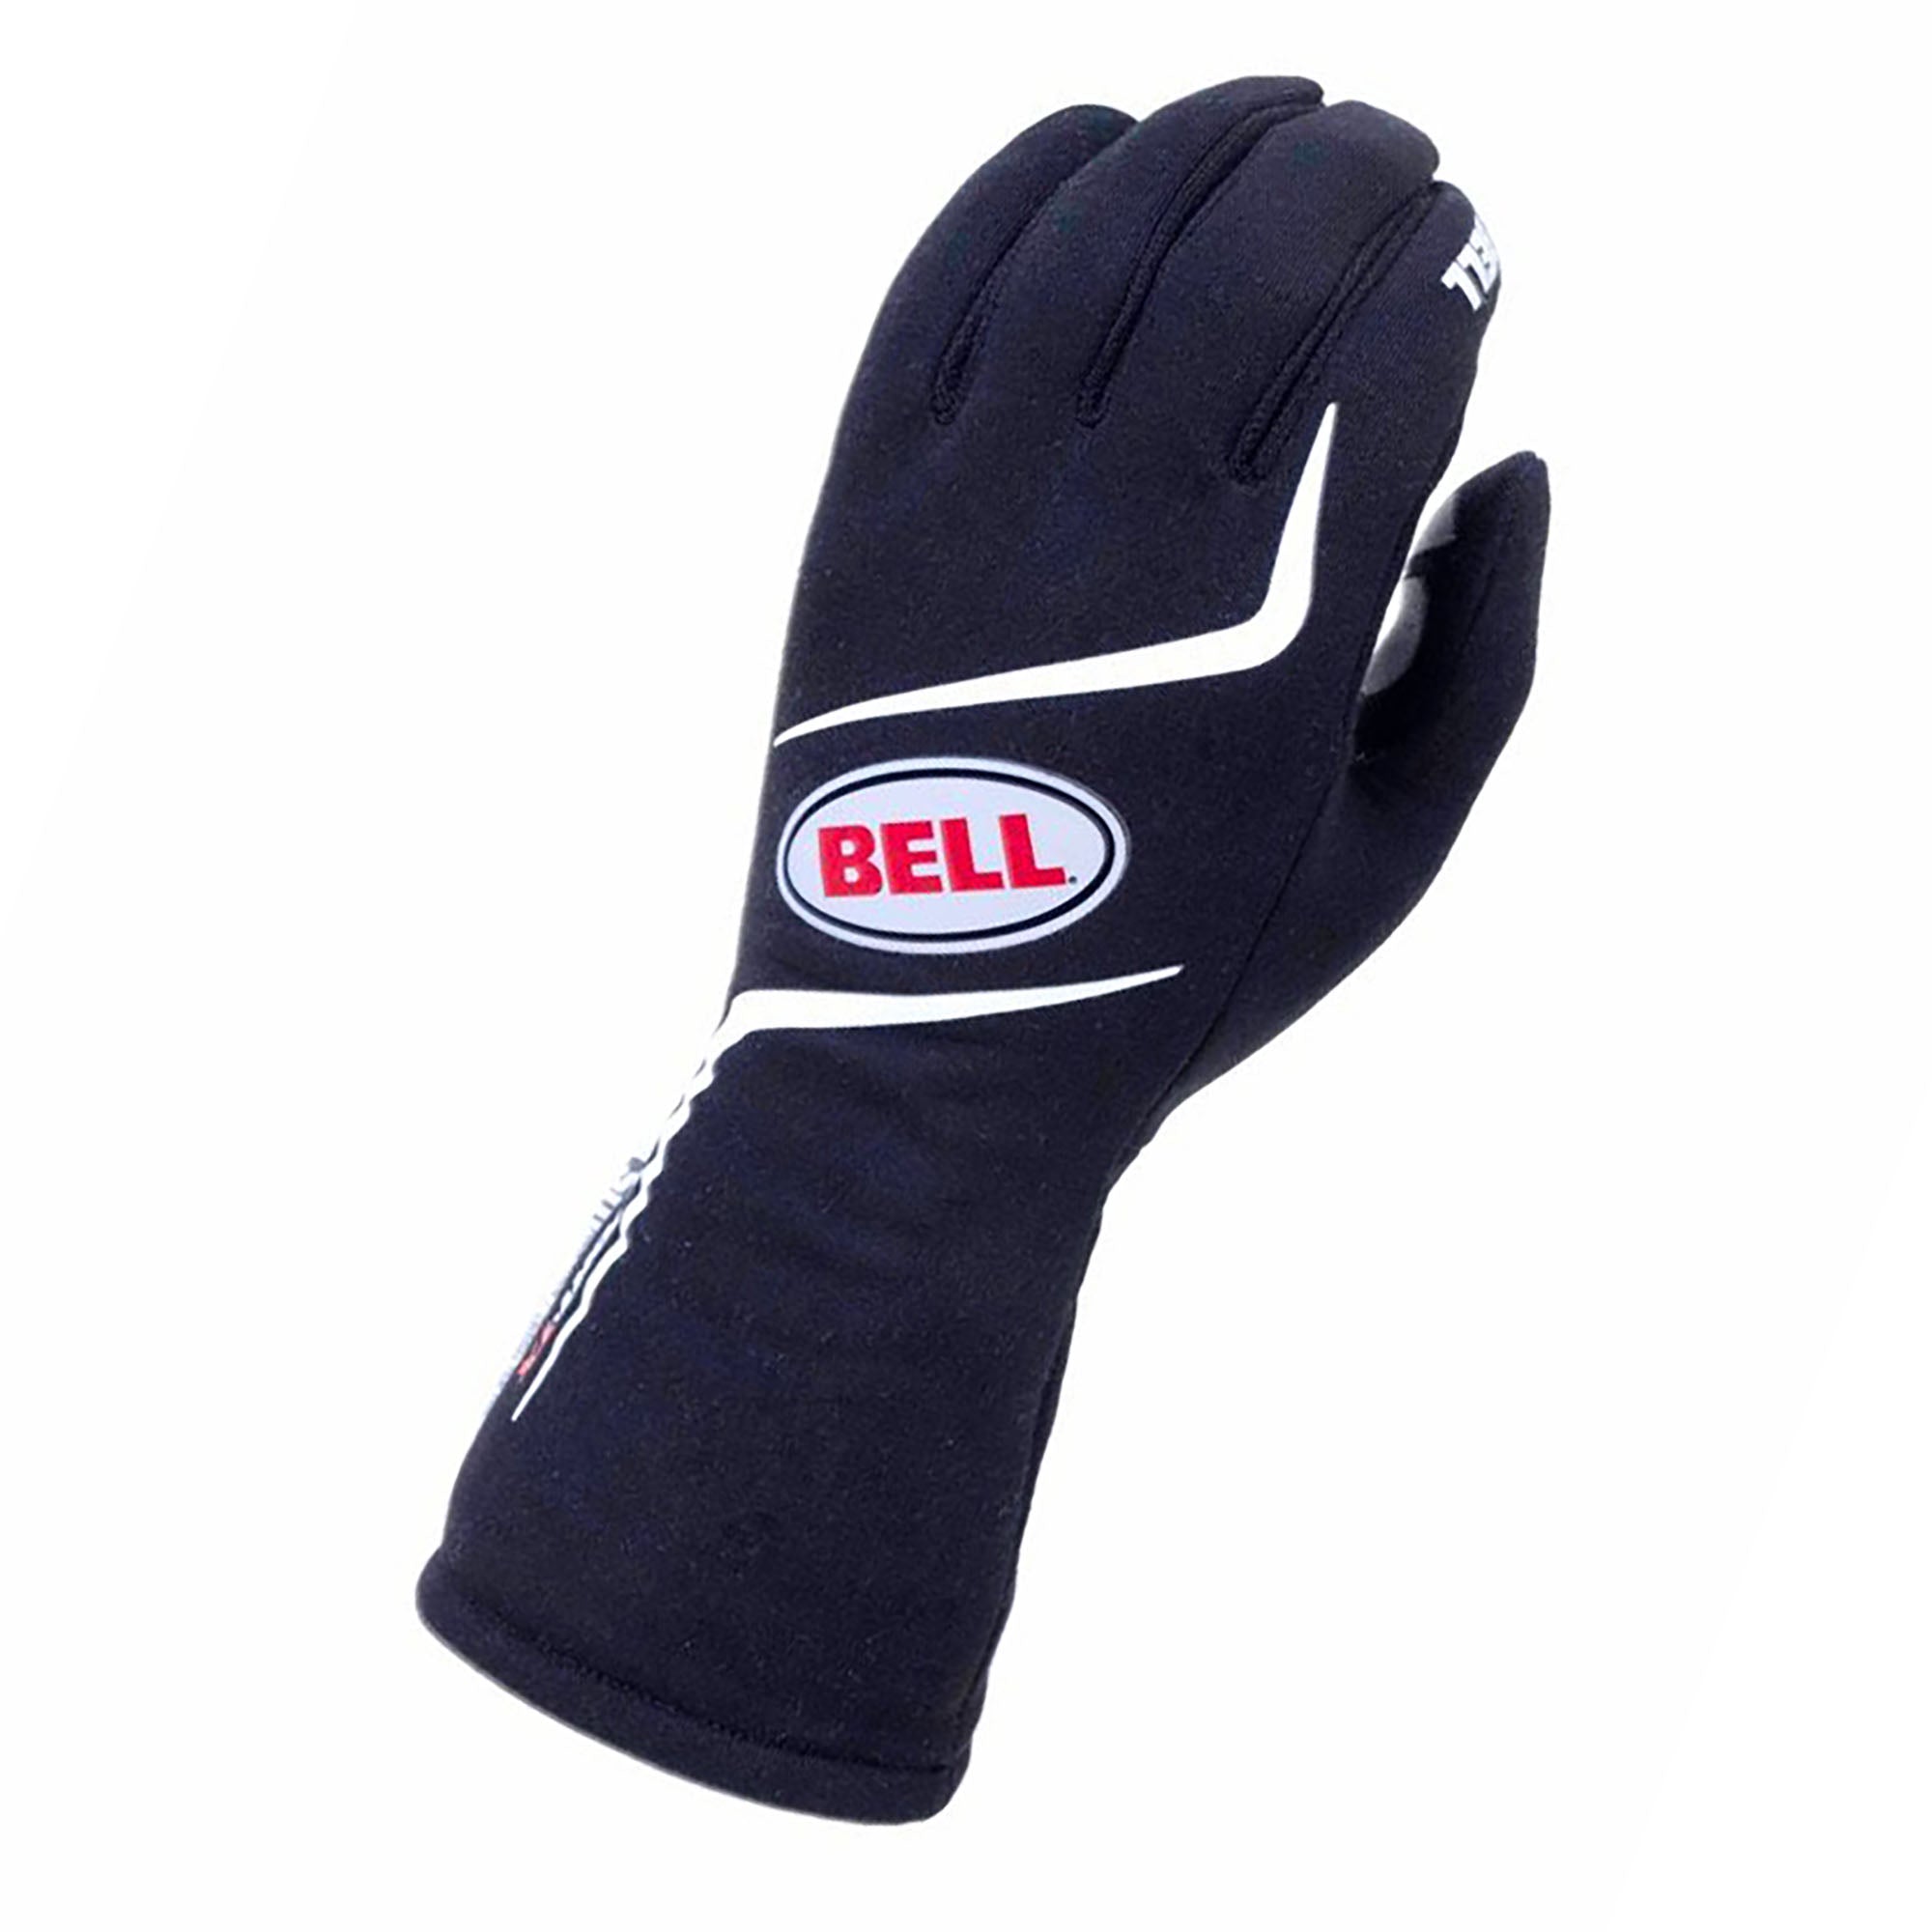 Bell Sport-YTX Youth Racing Gloves